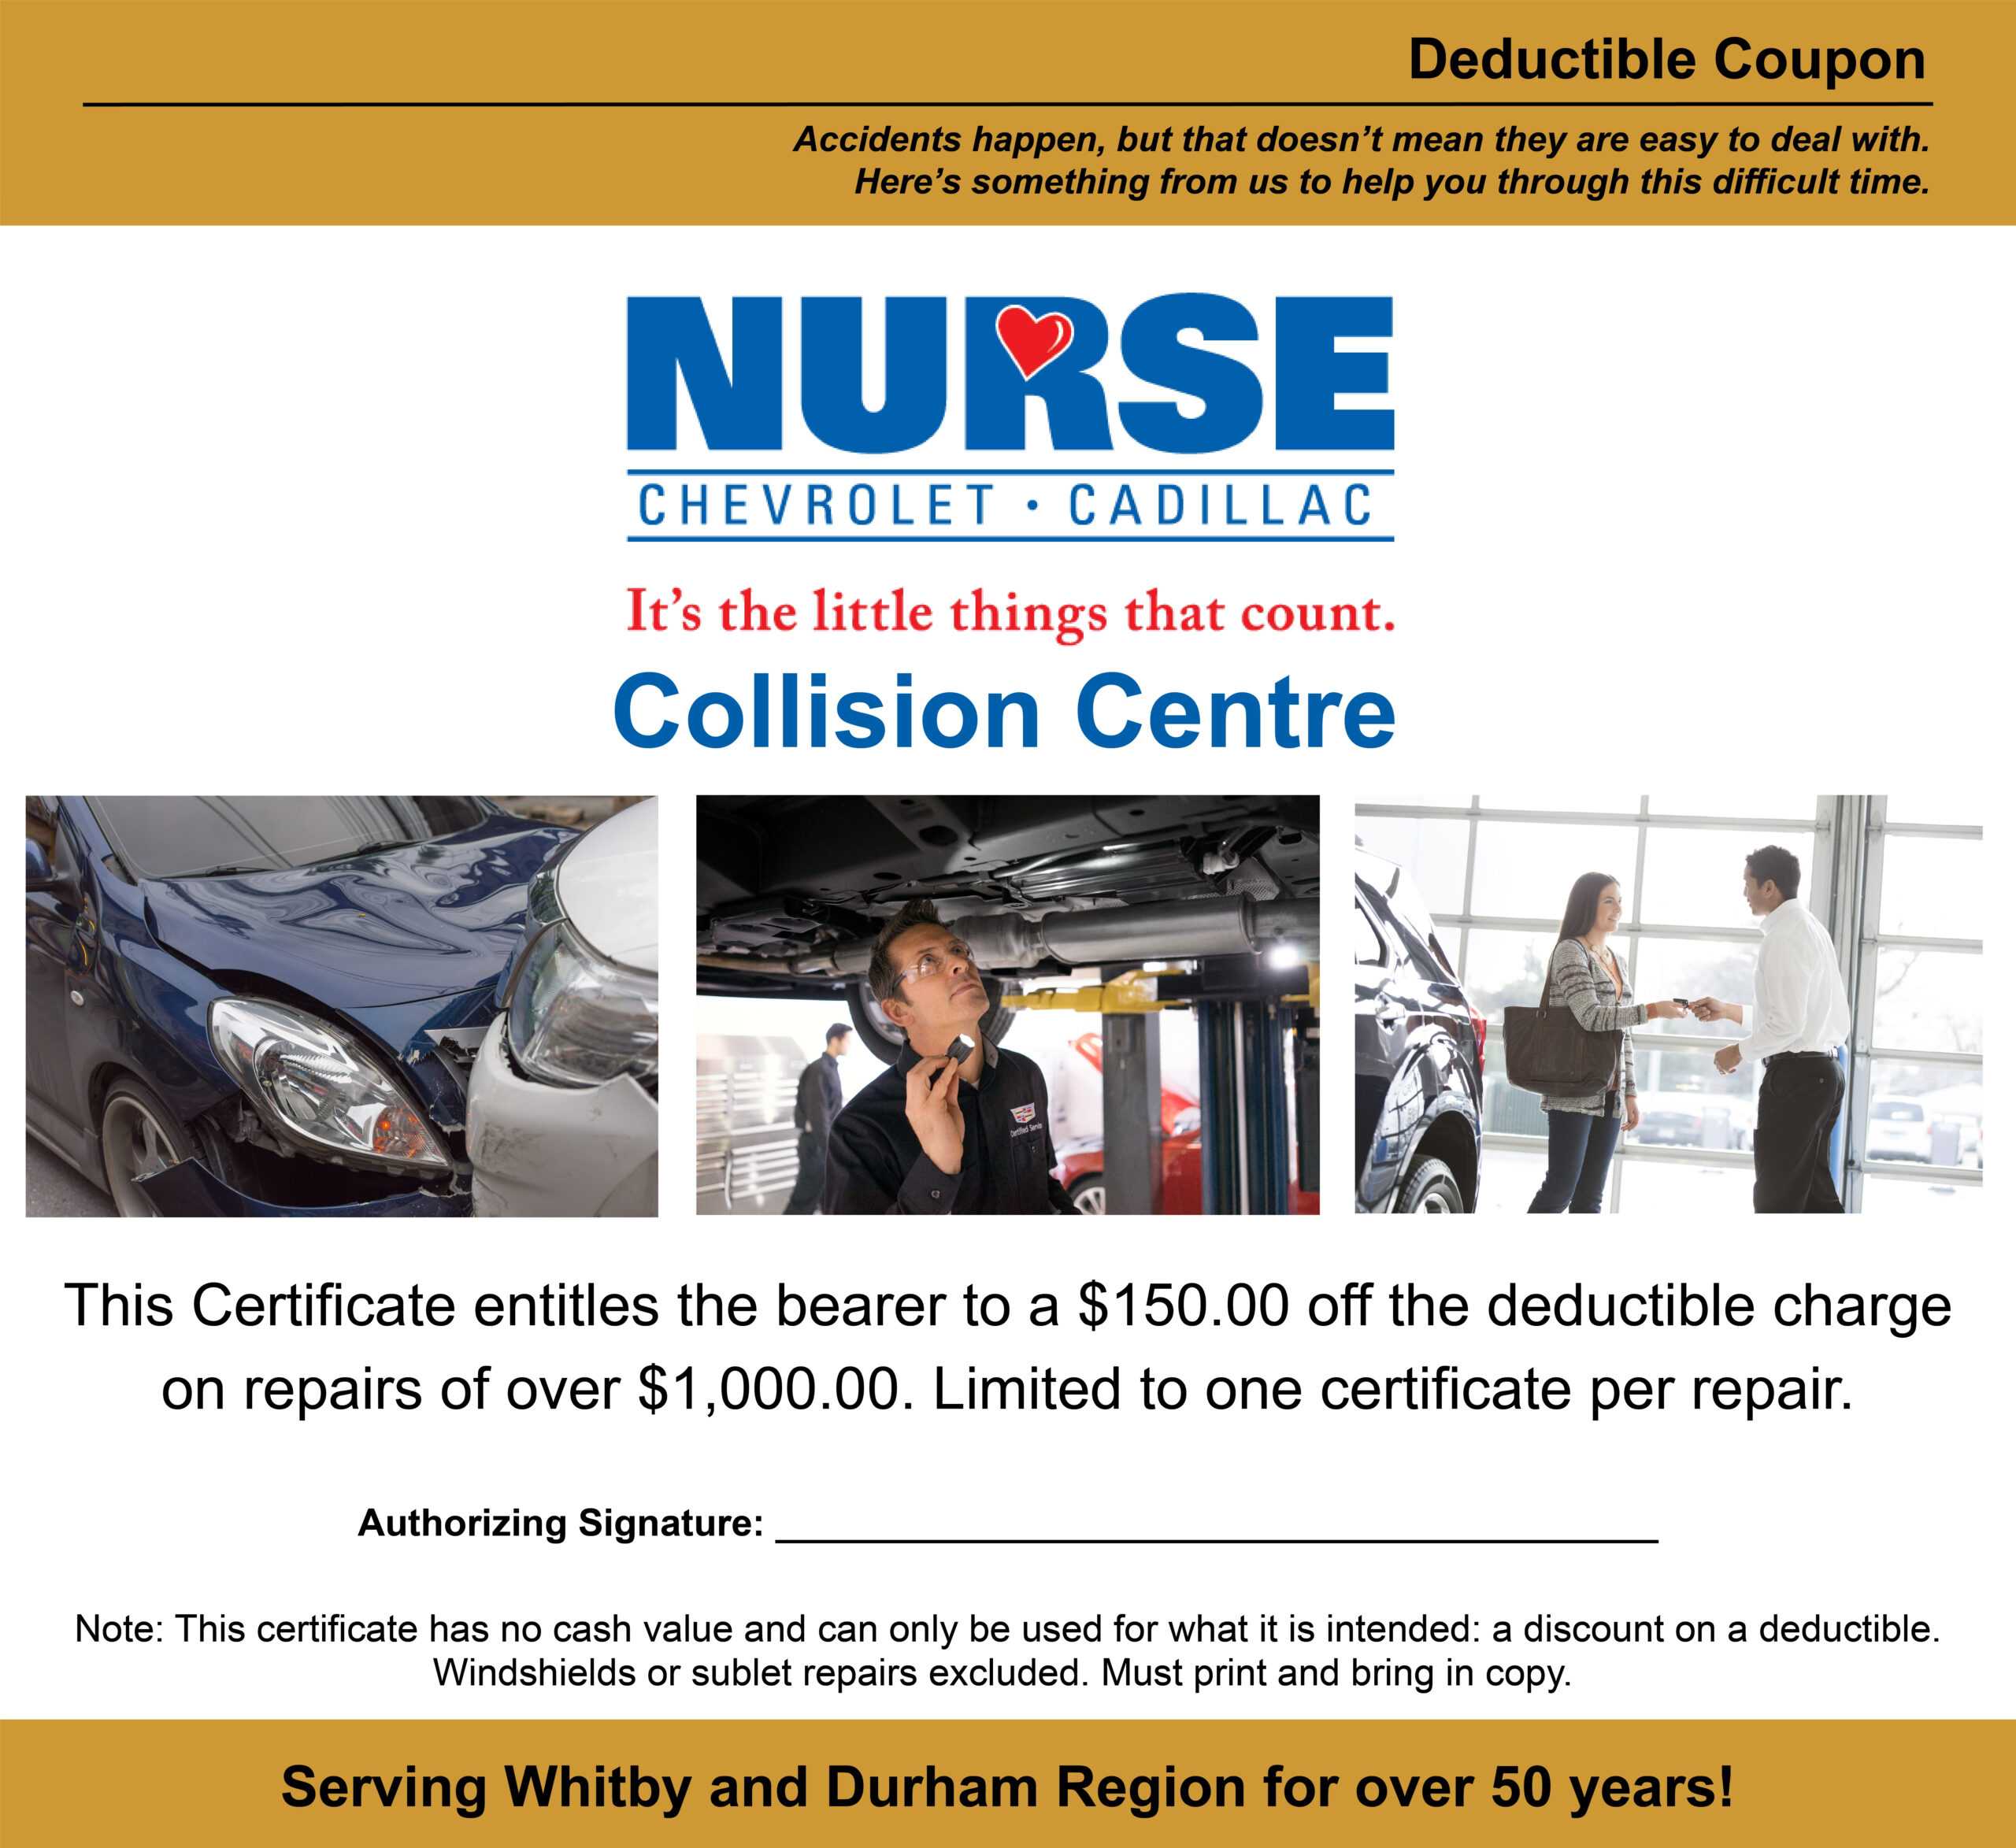 Exclusive Offers | Nurse Chevrolet Cadillac Intended For This Entitles The Bearer To Template Certificate